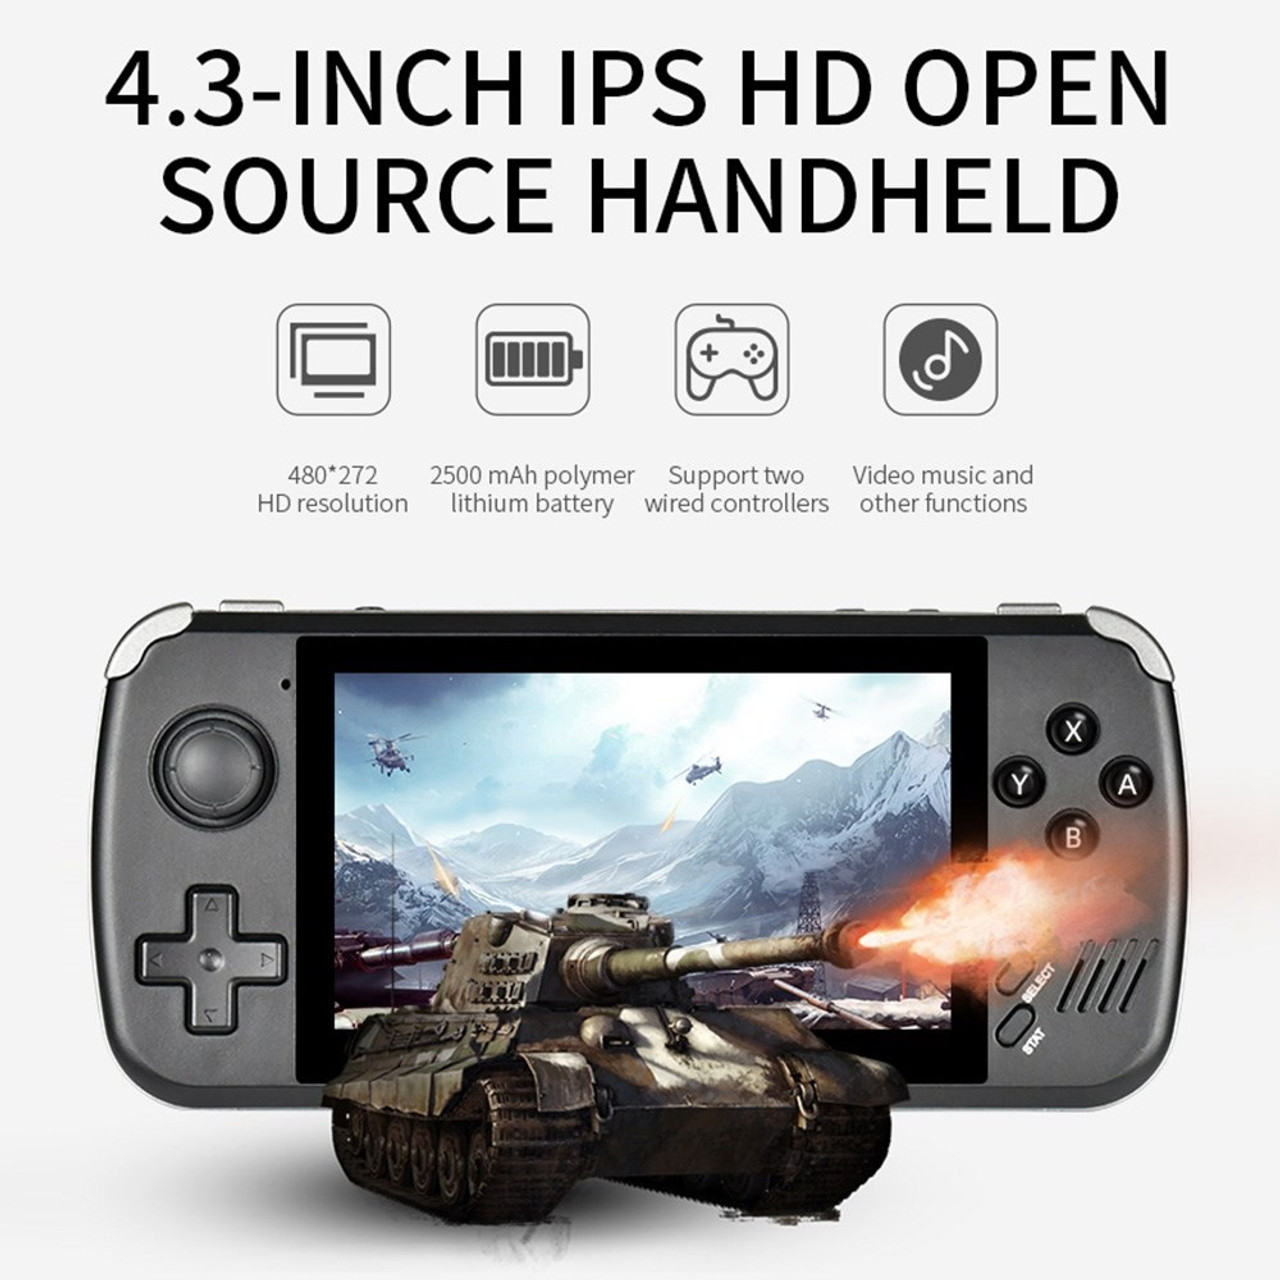 X50 Max HD Screen Handheld Game Console Set 5.1 Inch